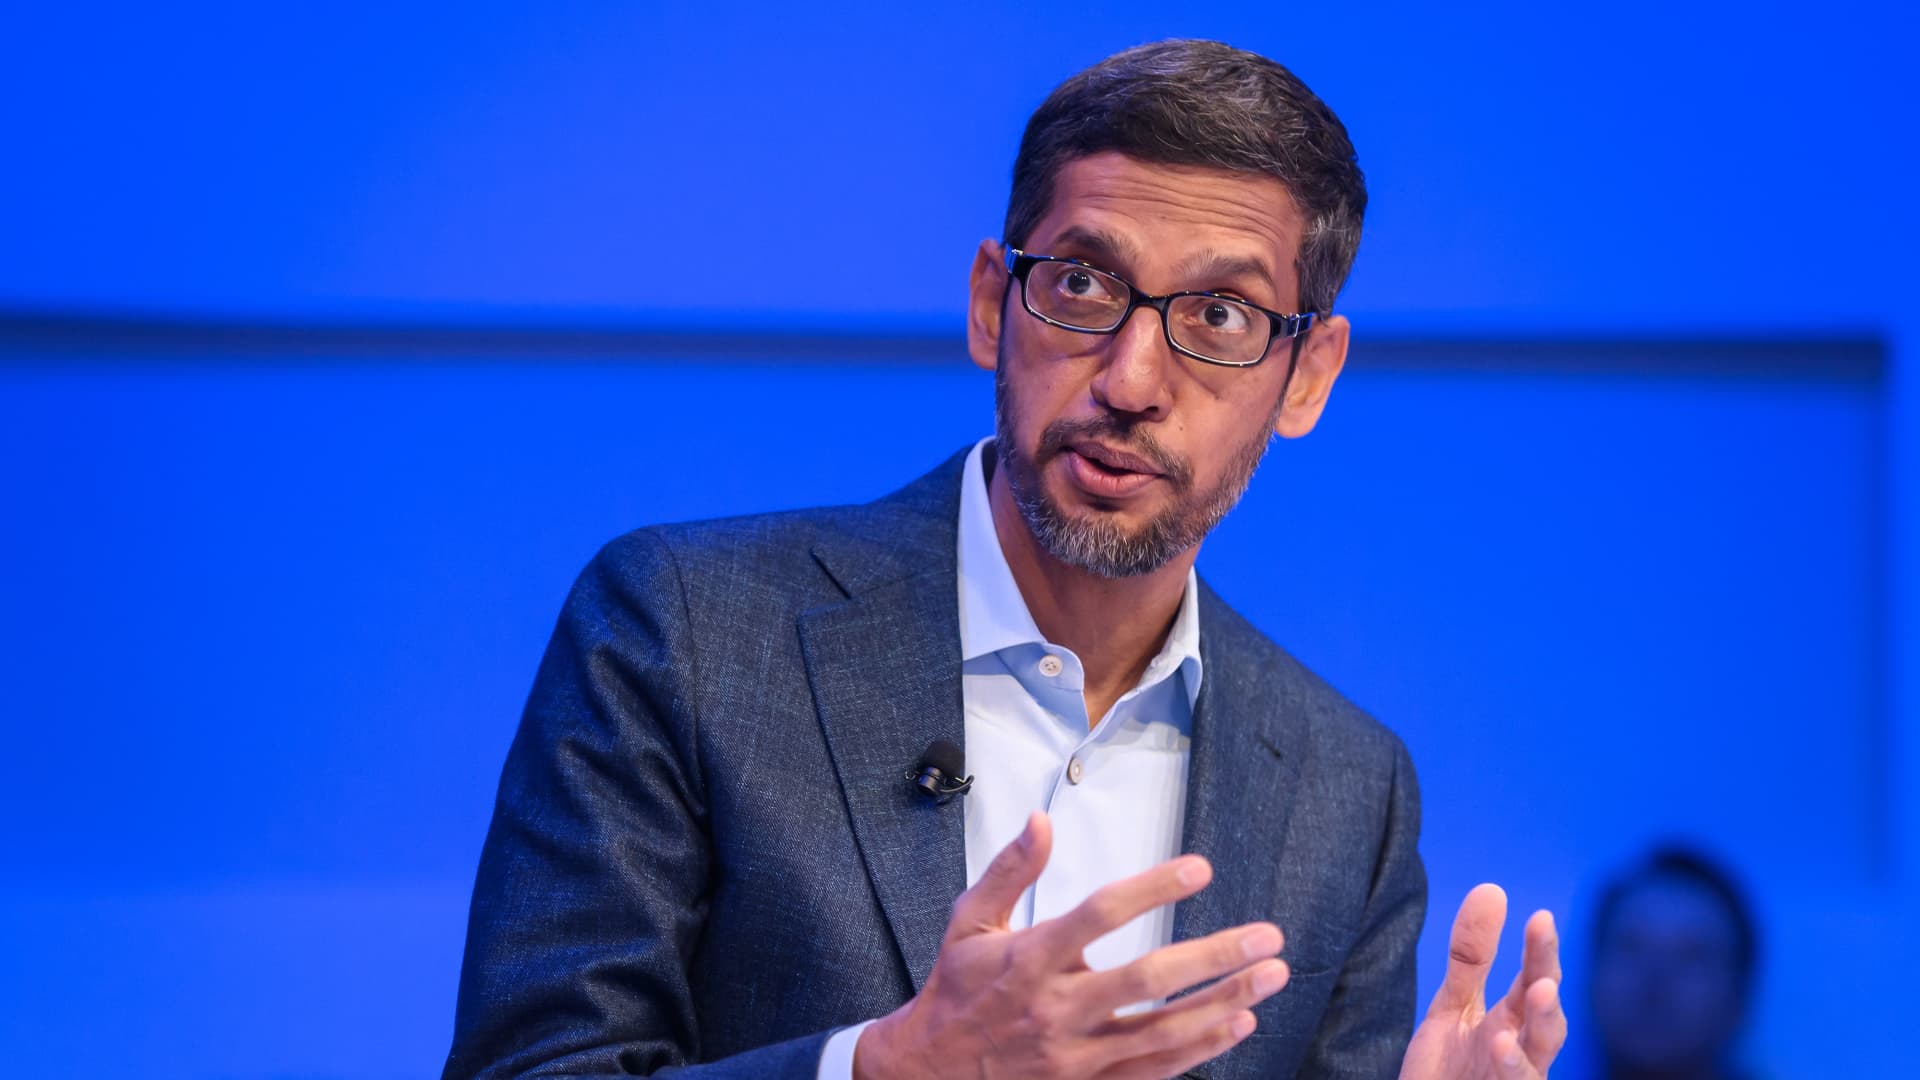 Google CEO Pichai fields questions on value cuts at all-hands assembly